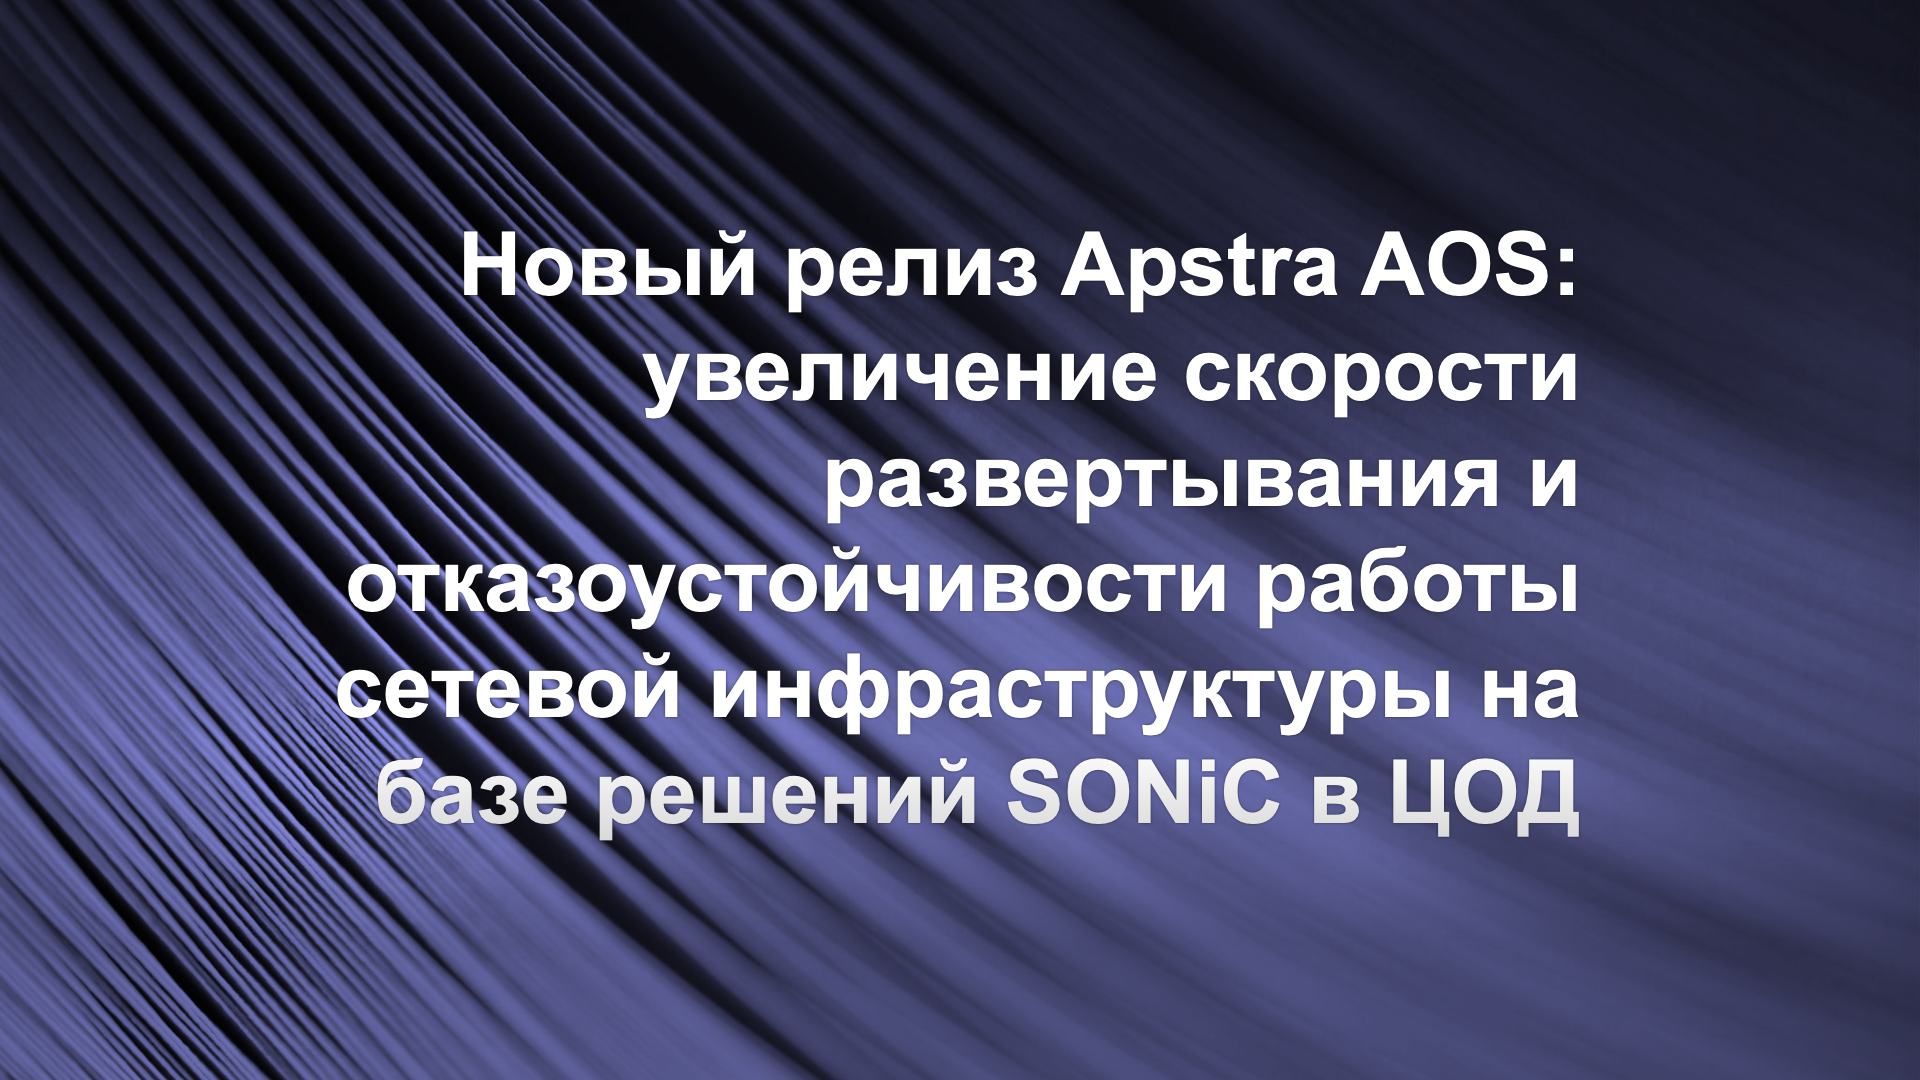 Apstra accelerates Sonic